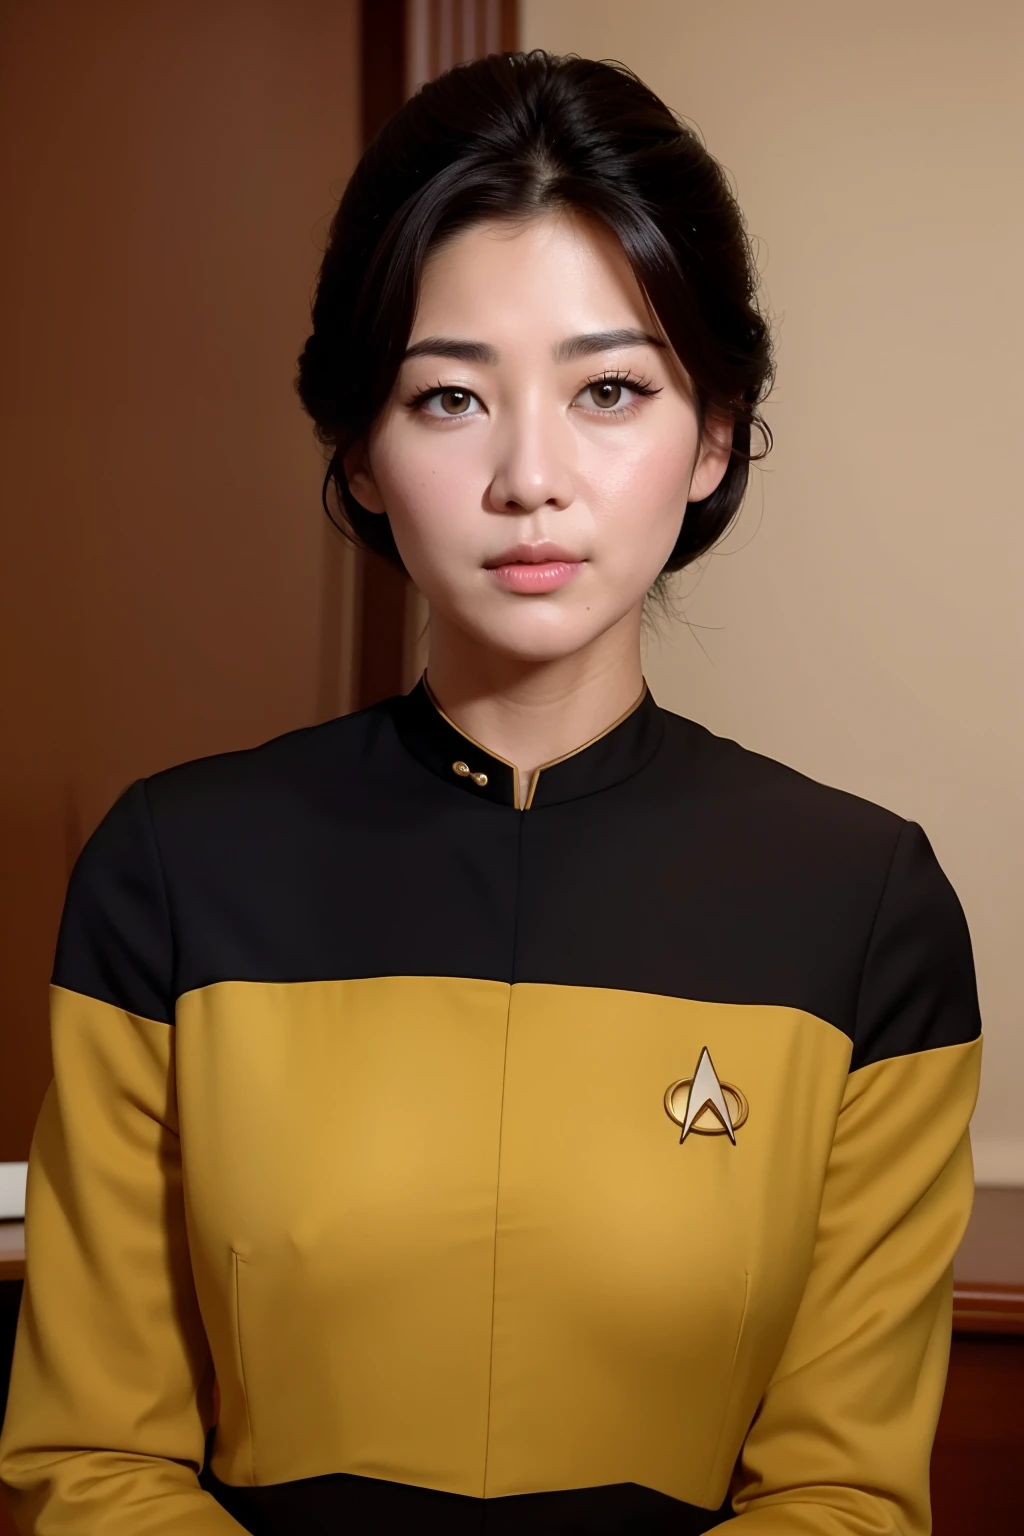 (masterpiece), best quality, expressive eyes, perfect face, Ensign Kim's older sister is a beautiful Asian girl, perfect eyes, perfect hands, yellow and black Star Trek Voyager uniform, tight uniform, photo-realistic, Harry Kim's Sister, ensign Harry Kim's mature Sister, bright indoor